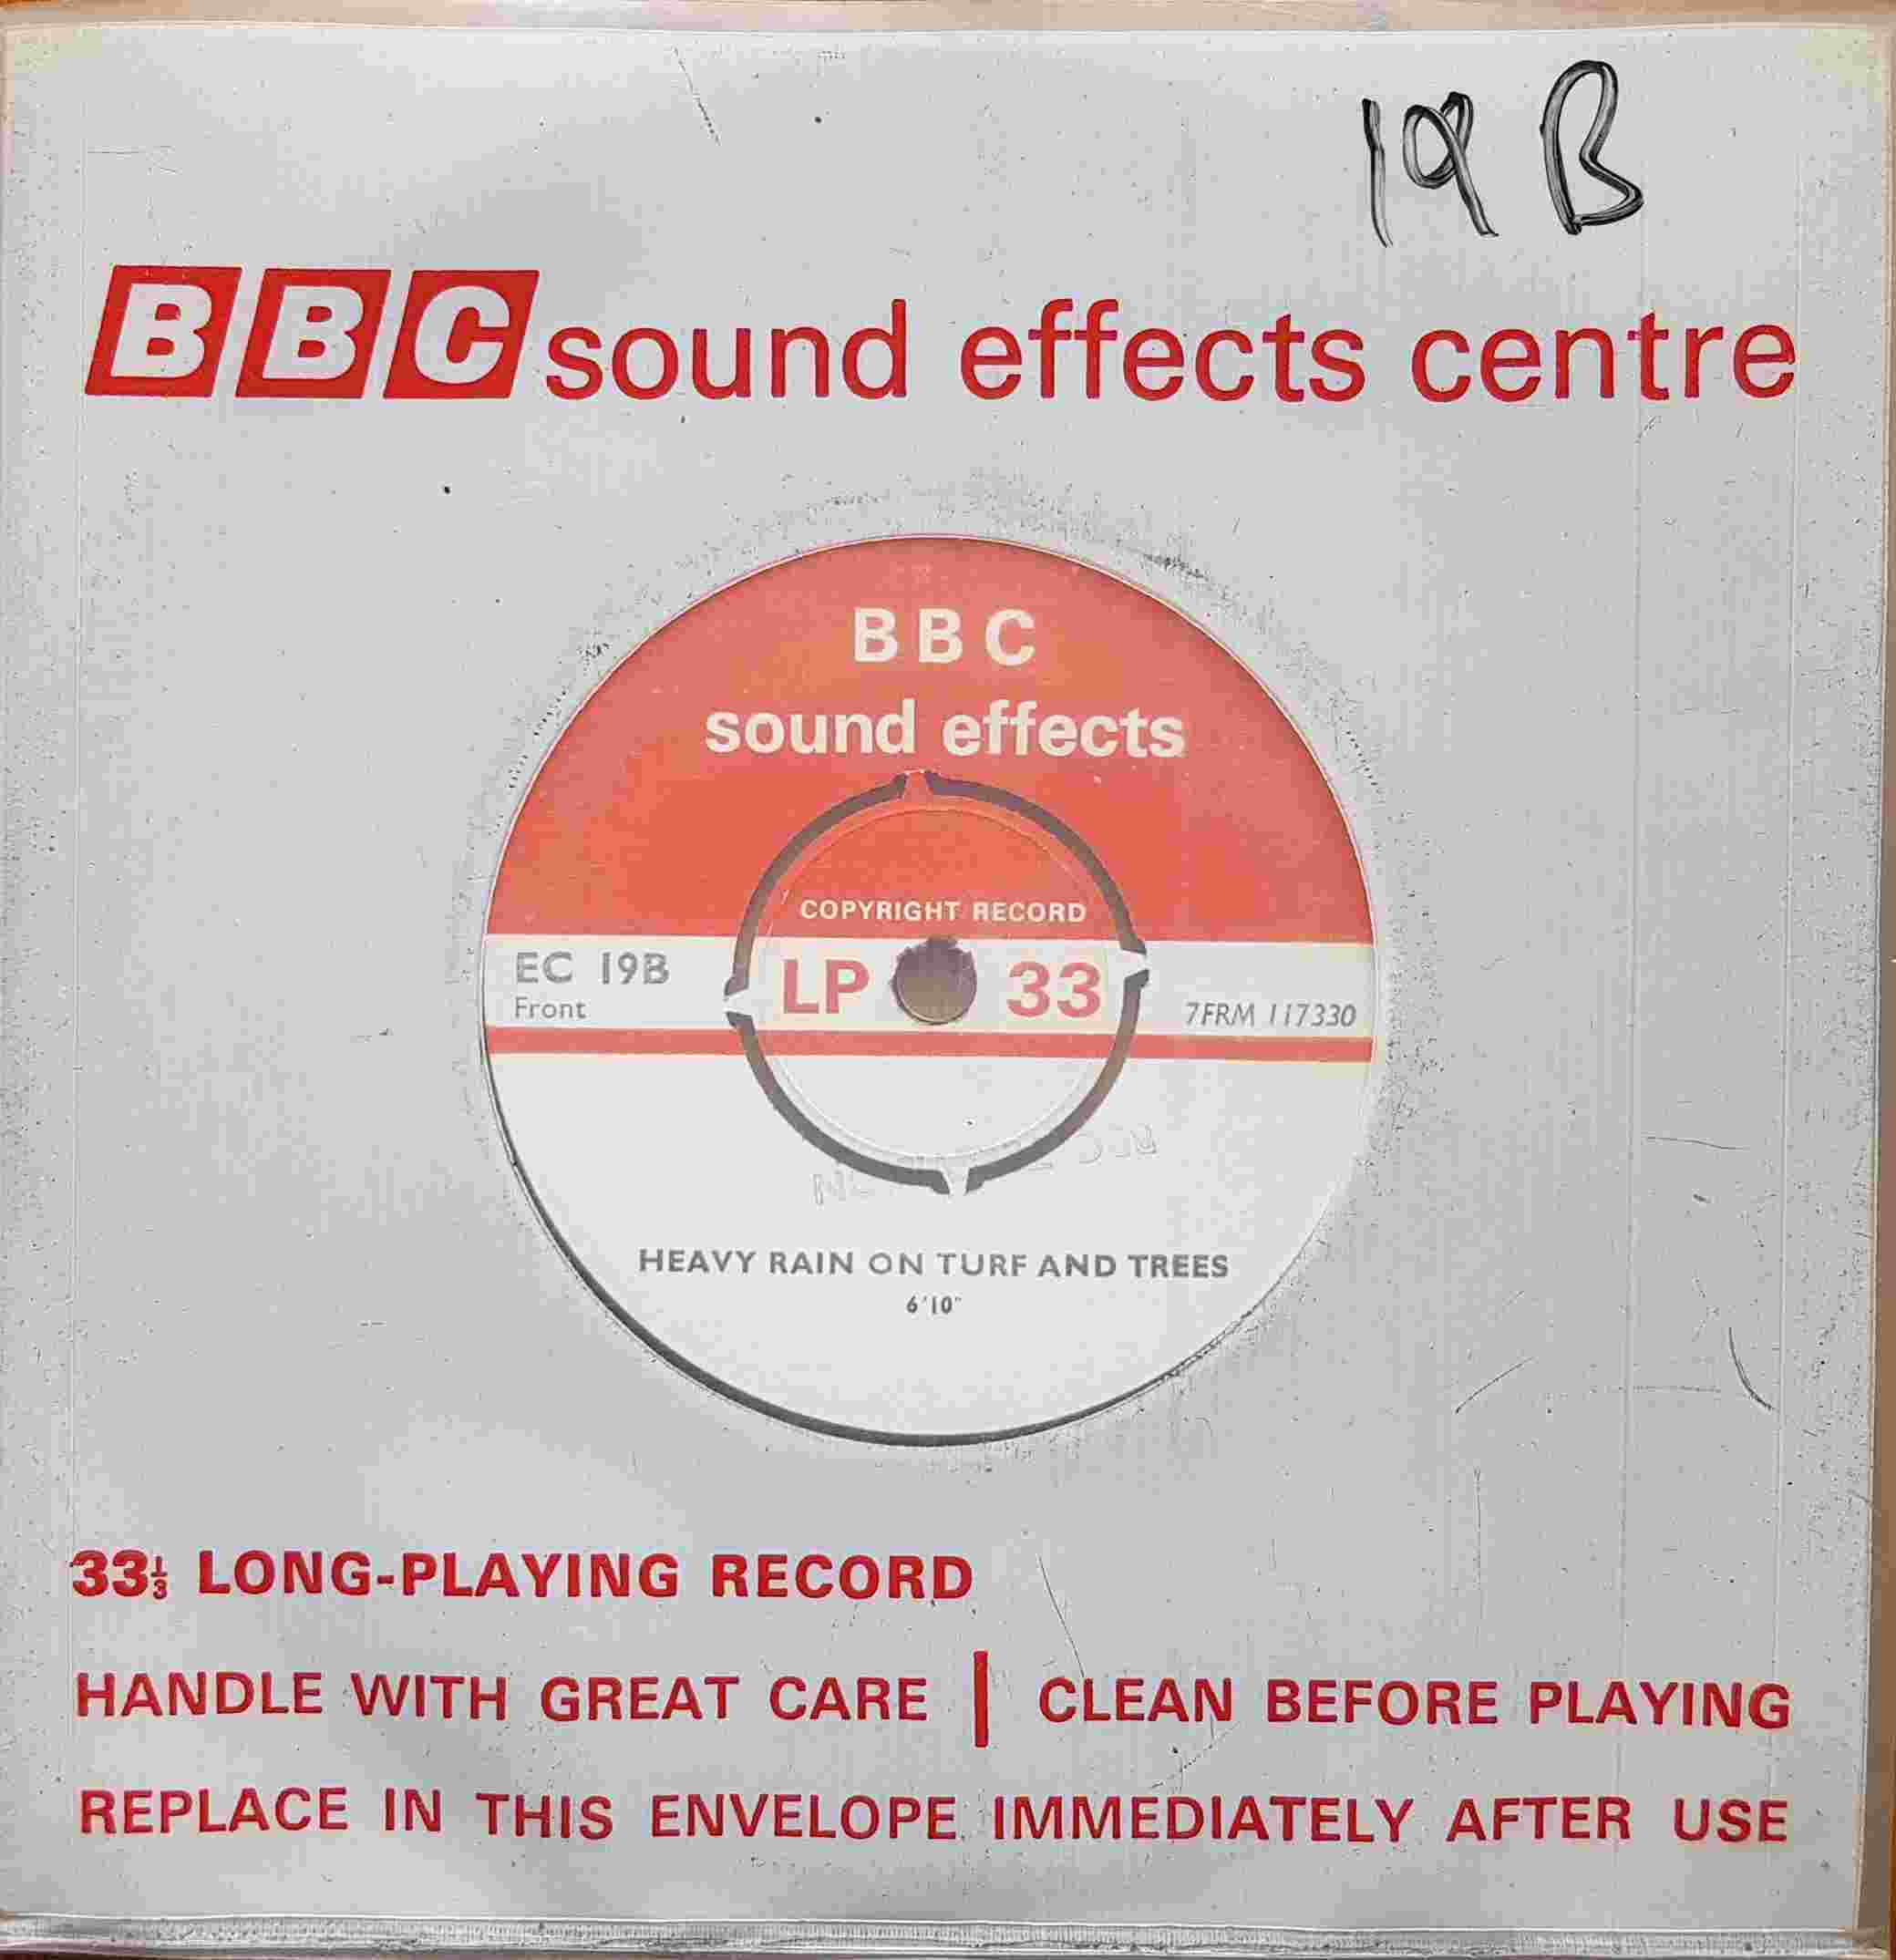 Picture of EC 19B Heavy rain by artist Not registered from the BBC singles - Records and Tapes library